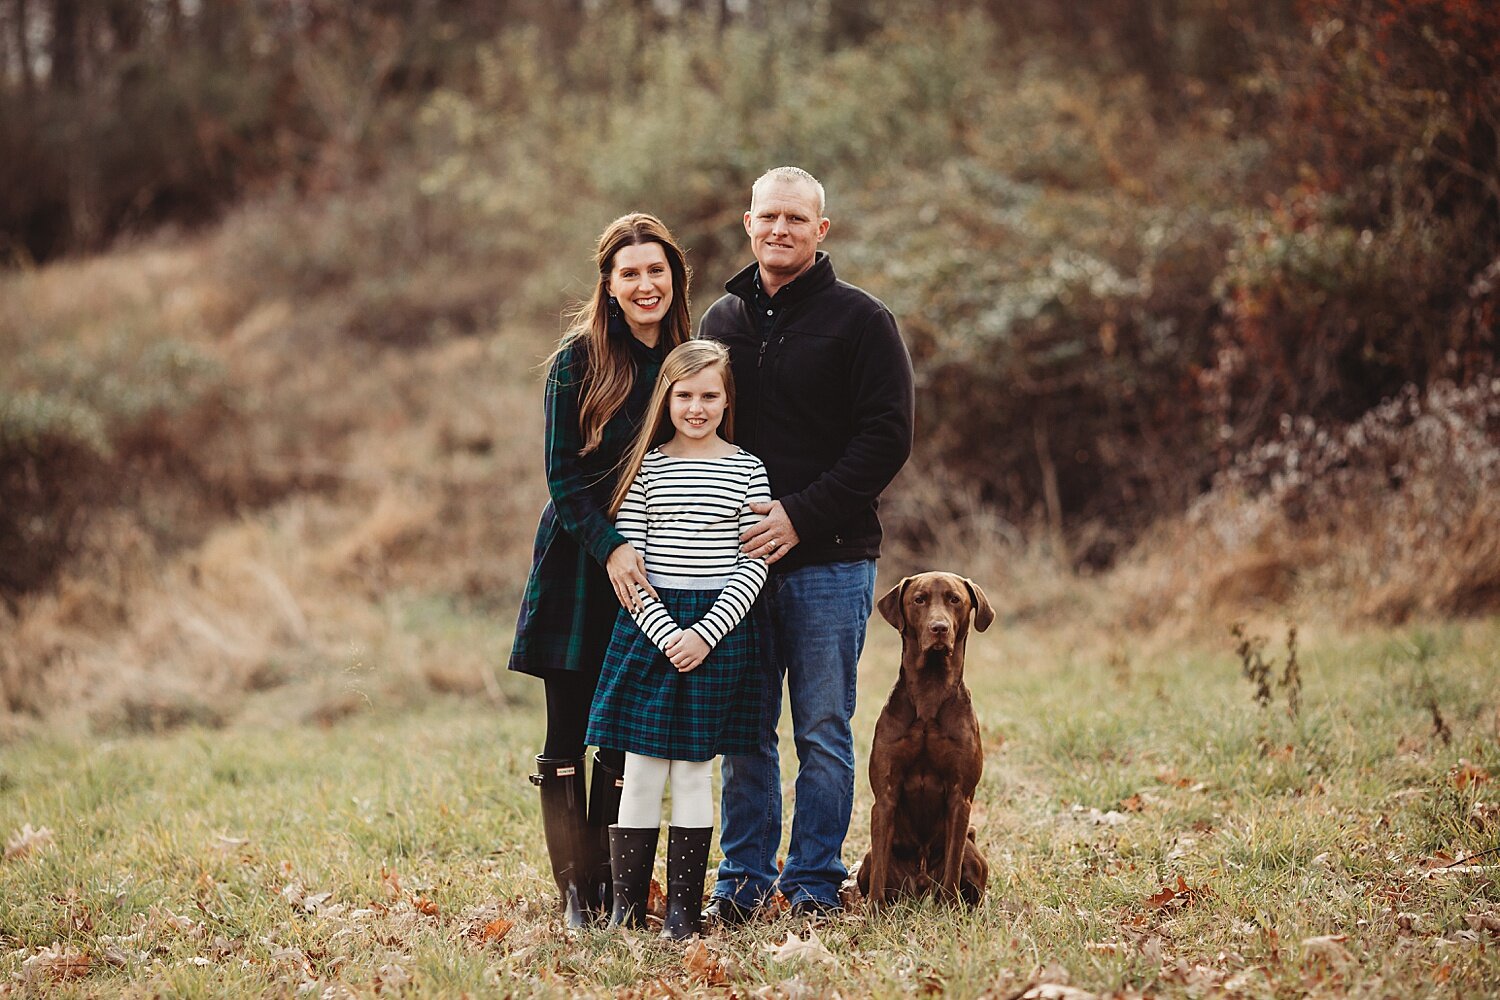 Oley Berks County fall family portrait session photographer